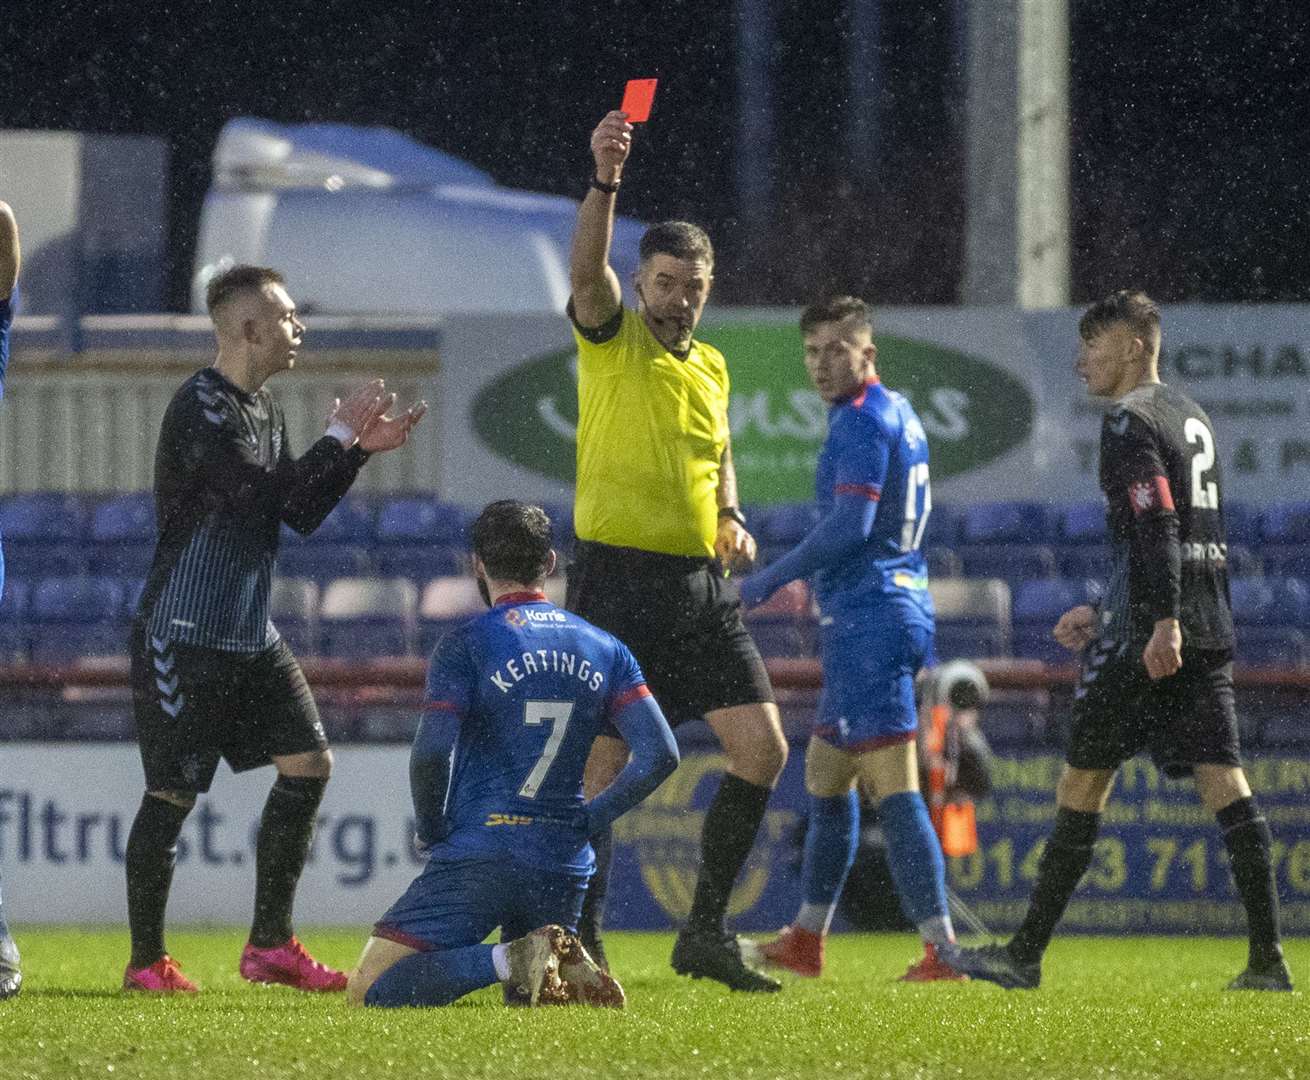 Picture - Ken Macpherson, Inverness. SCOTTISH CHALLENGE CUP - SEMI-FINAL. Inverness CT(2) v Rangers Colts(1).16.02.20. ICT's James Keatings went down under a challenge from Rangers' Ciaran Dickson, only to be shown his 2nd yellow card and a red card.